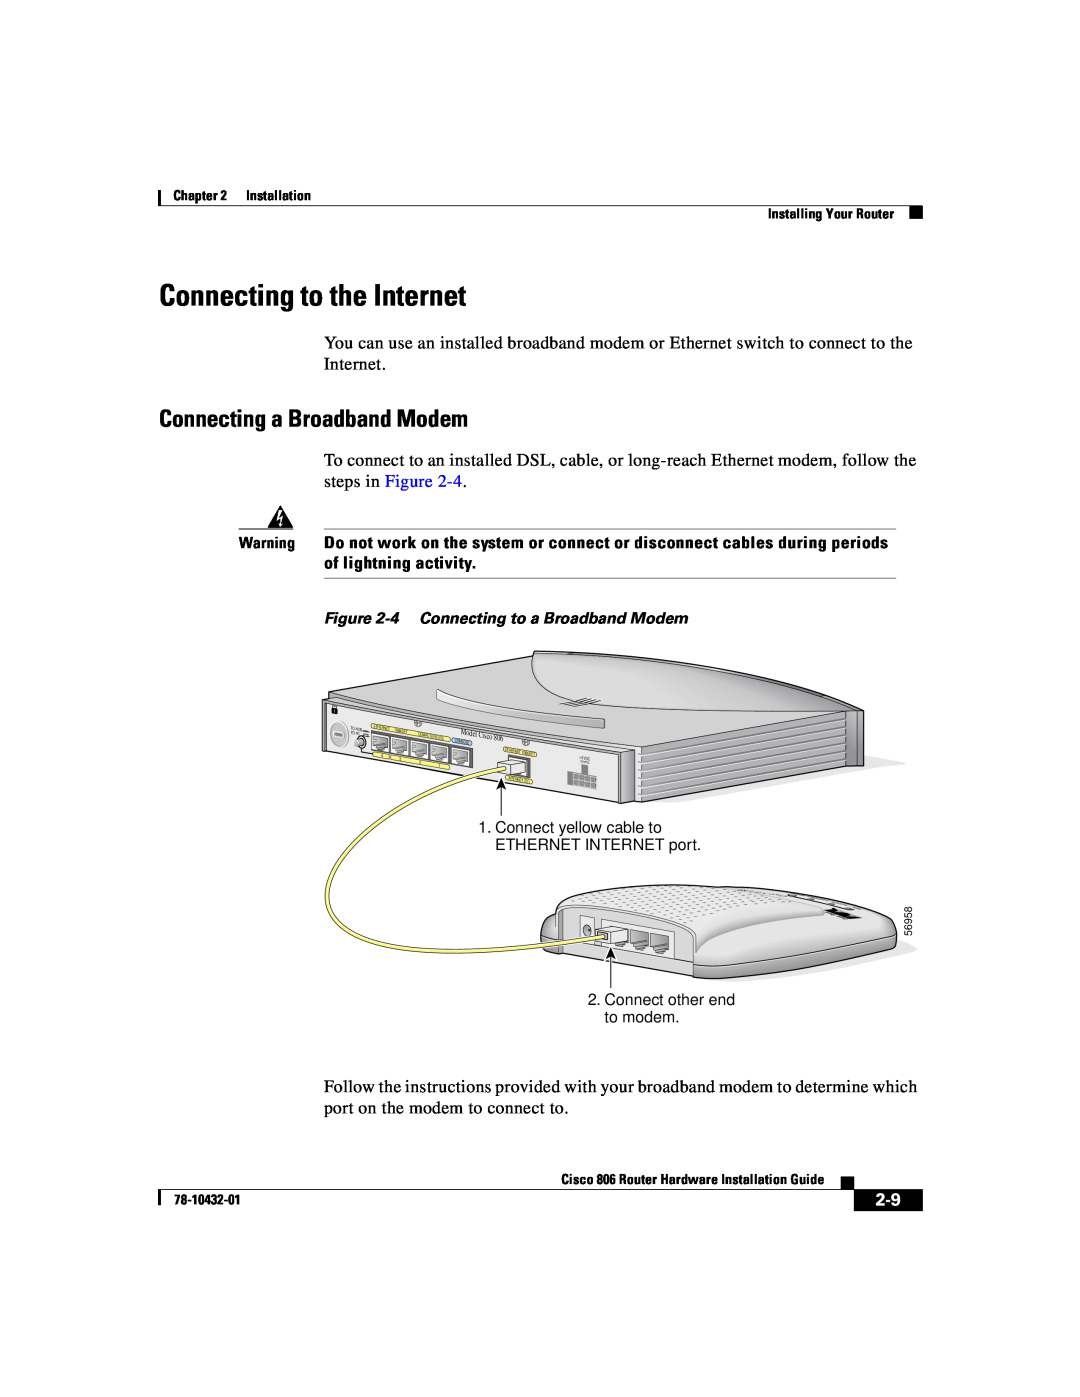 Cisco Systems 806 manual Connecting to the Internet, Connecting a Broadband Modem 